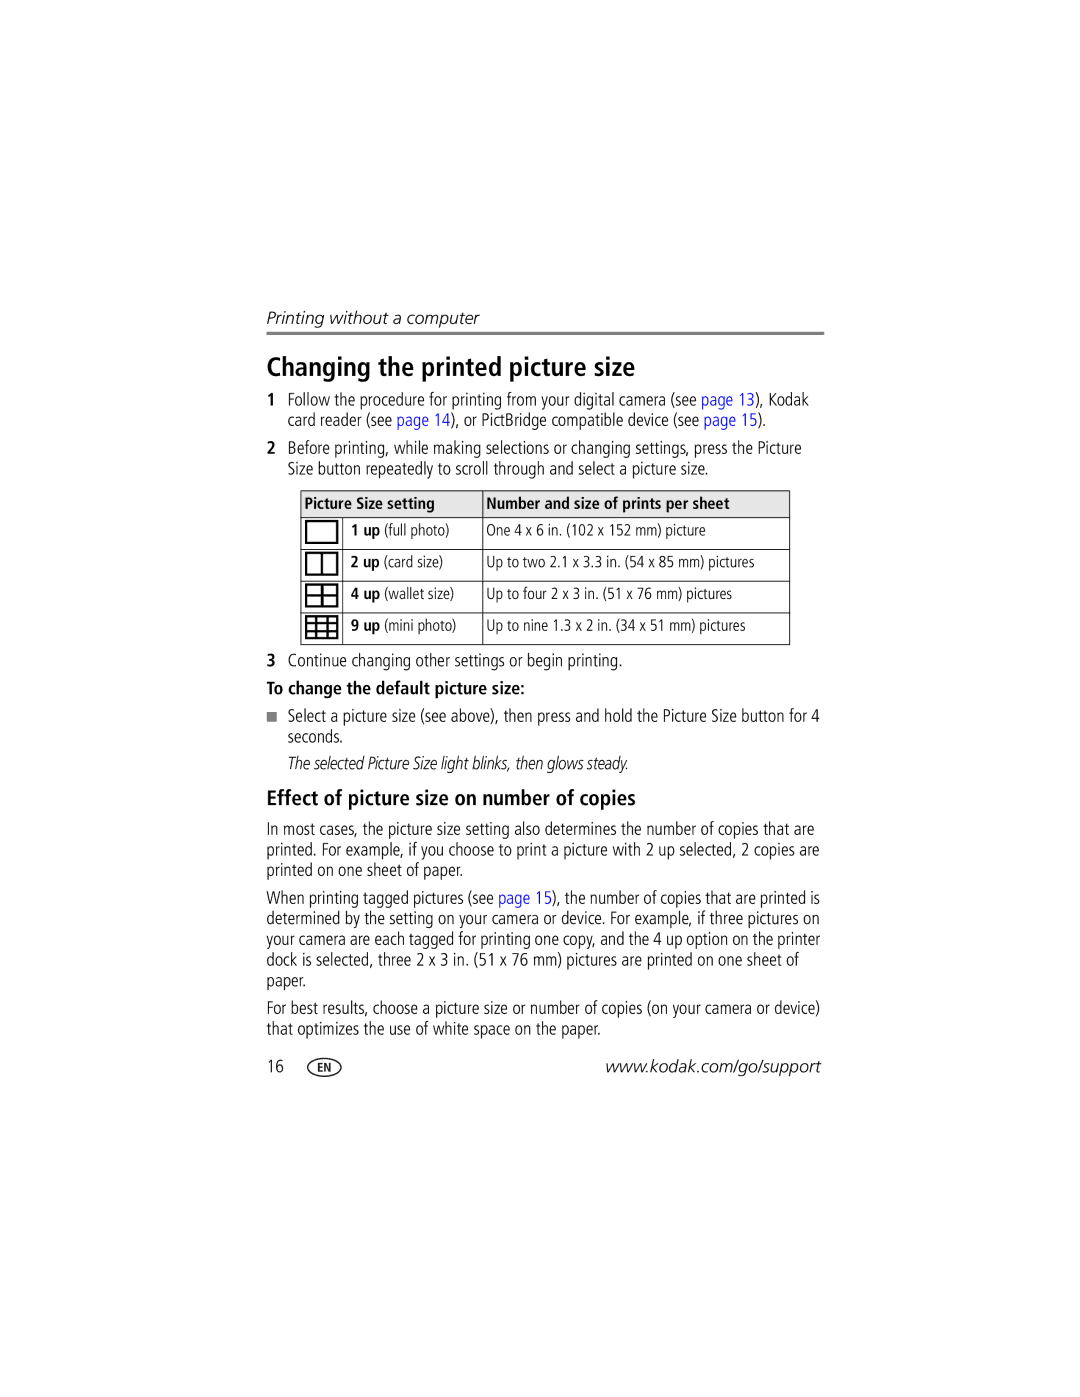 Kodak Series 3 manual Changing the printed picture size, Effect of picture size on number of copies 